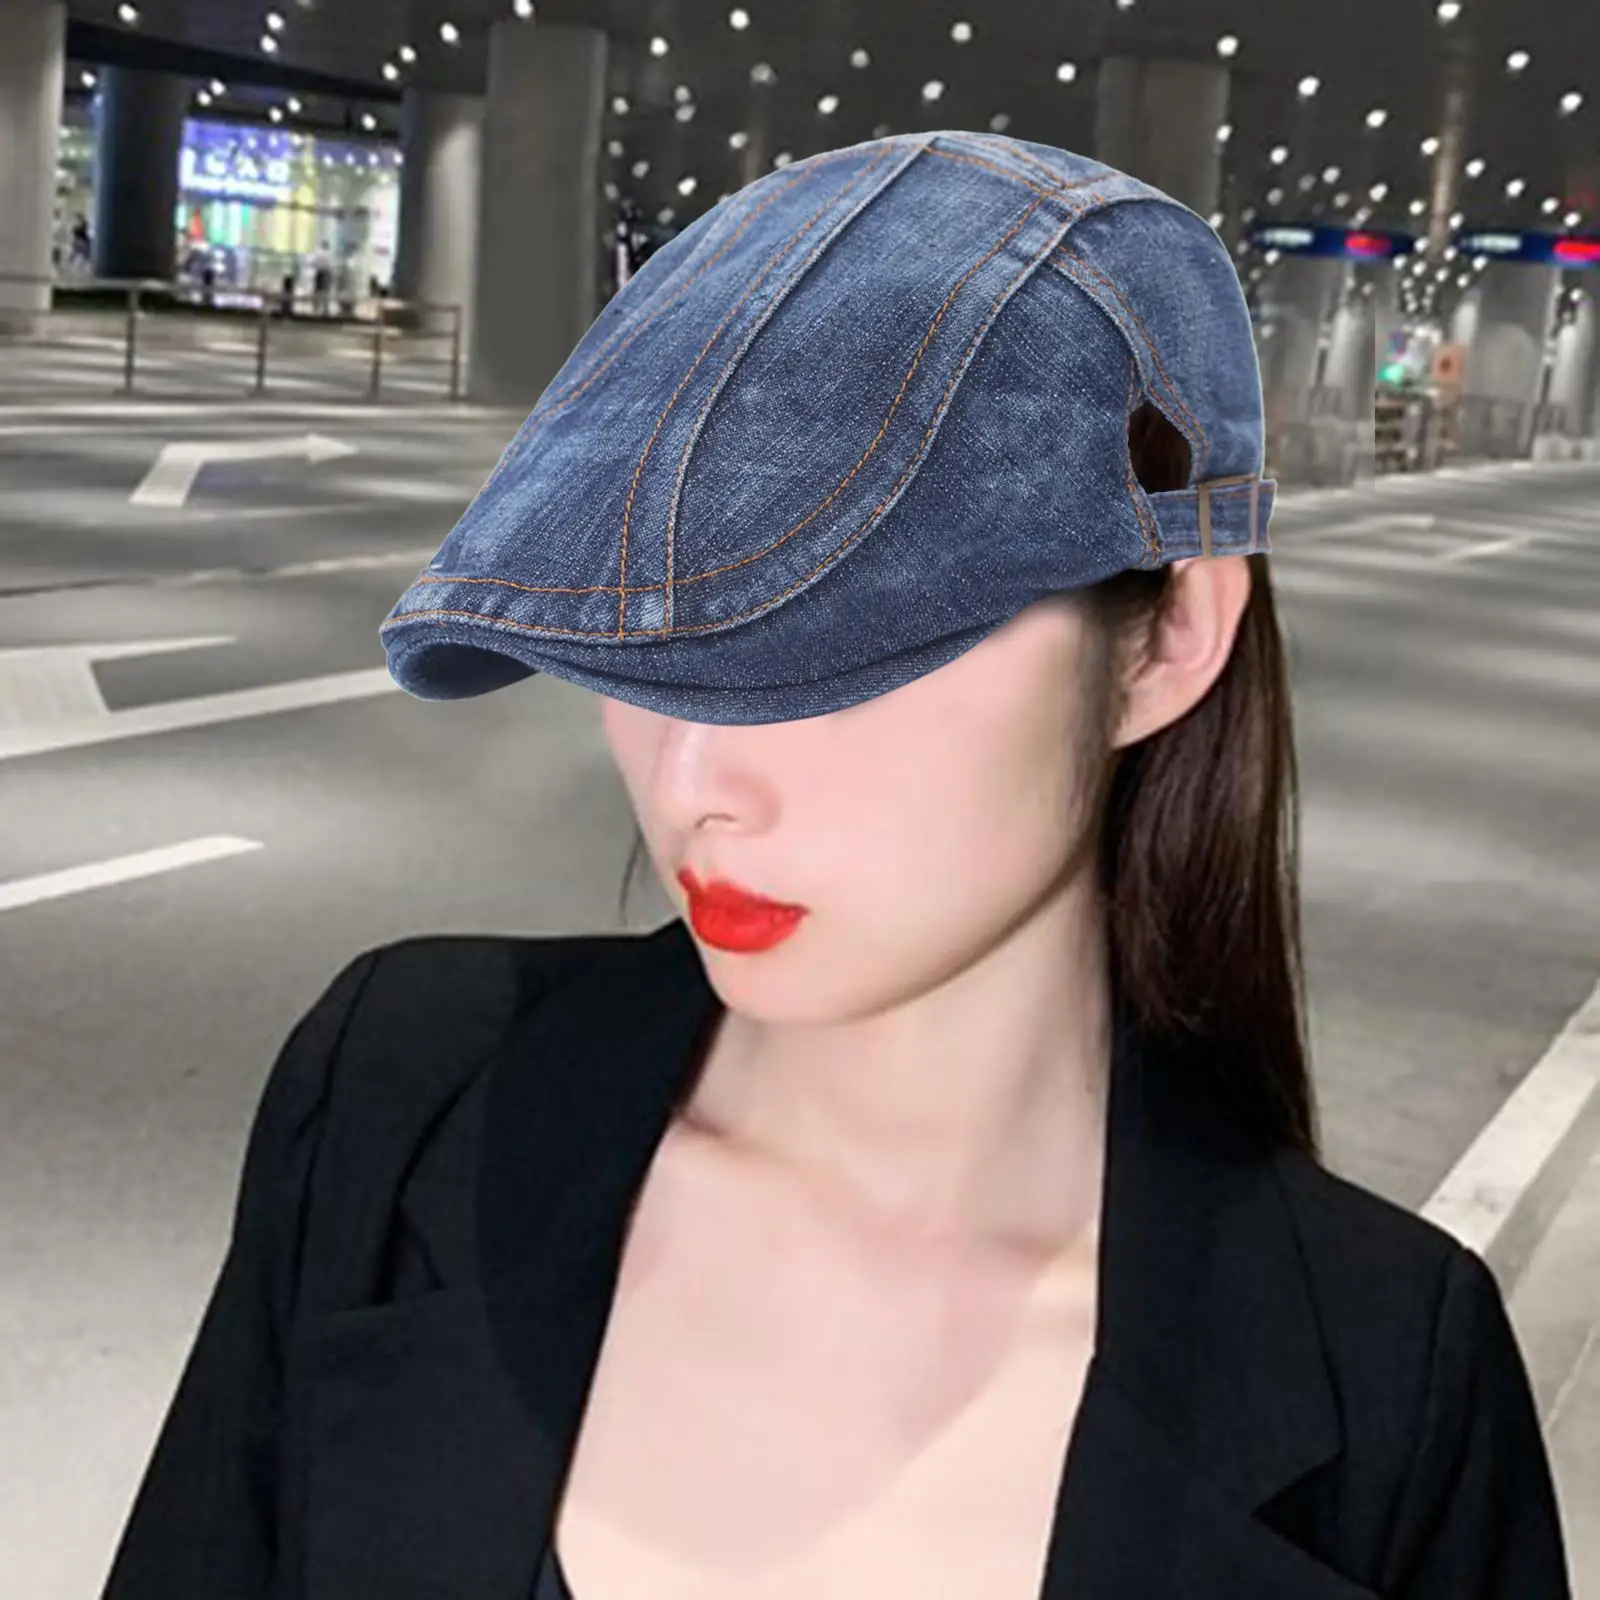 Unisex Newsboy Hat,  Driving Hunting Cabbie  Caps for Adjustable